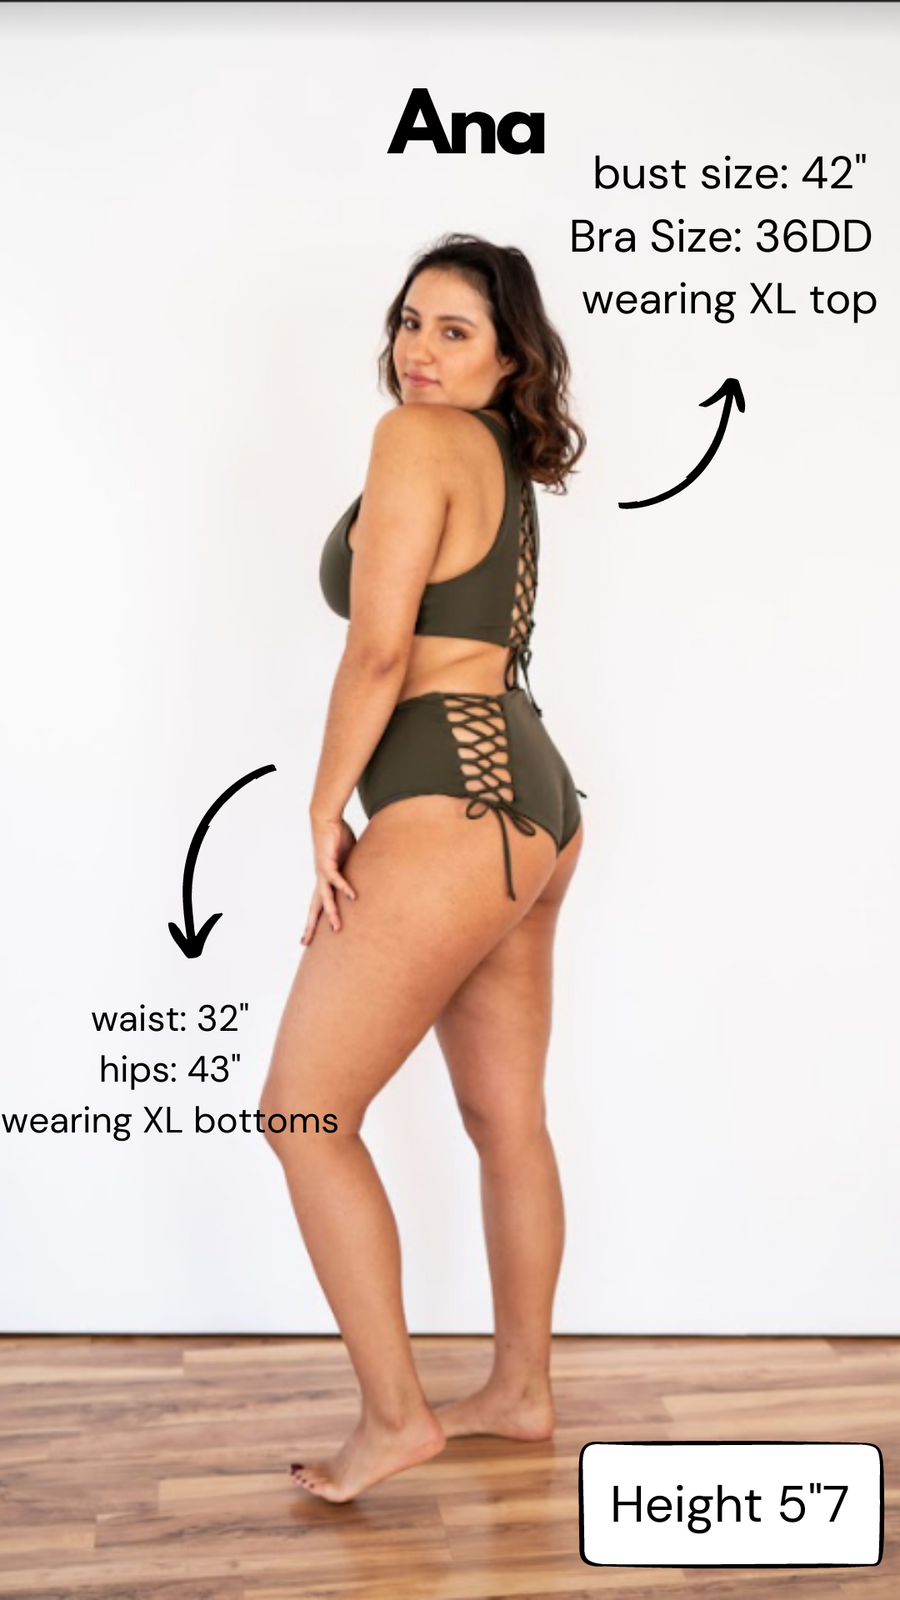 Wholesale Fishnet Bodysuit Plus Size Products at Factory Prices from  Manufacturers in China, India, Korea, etc.